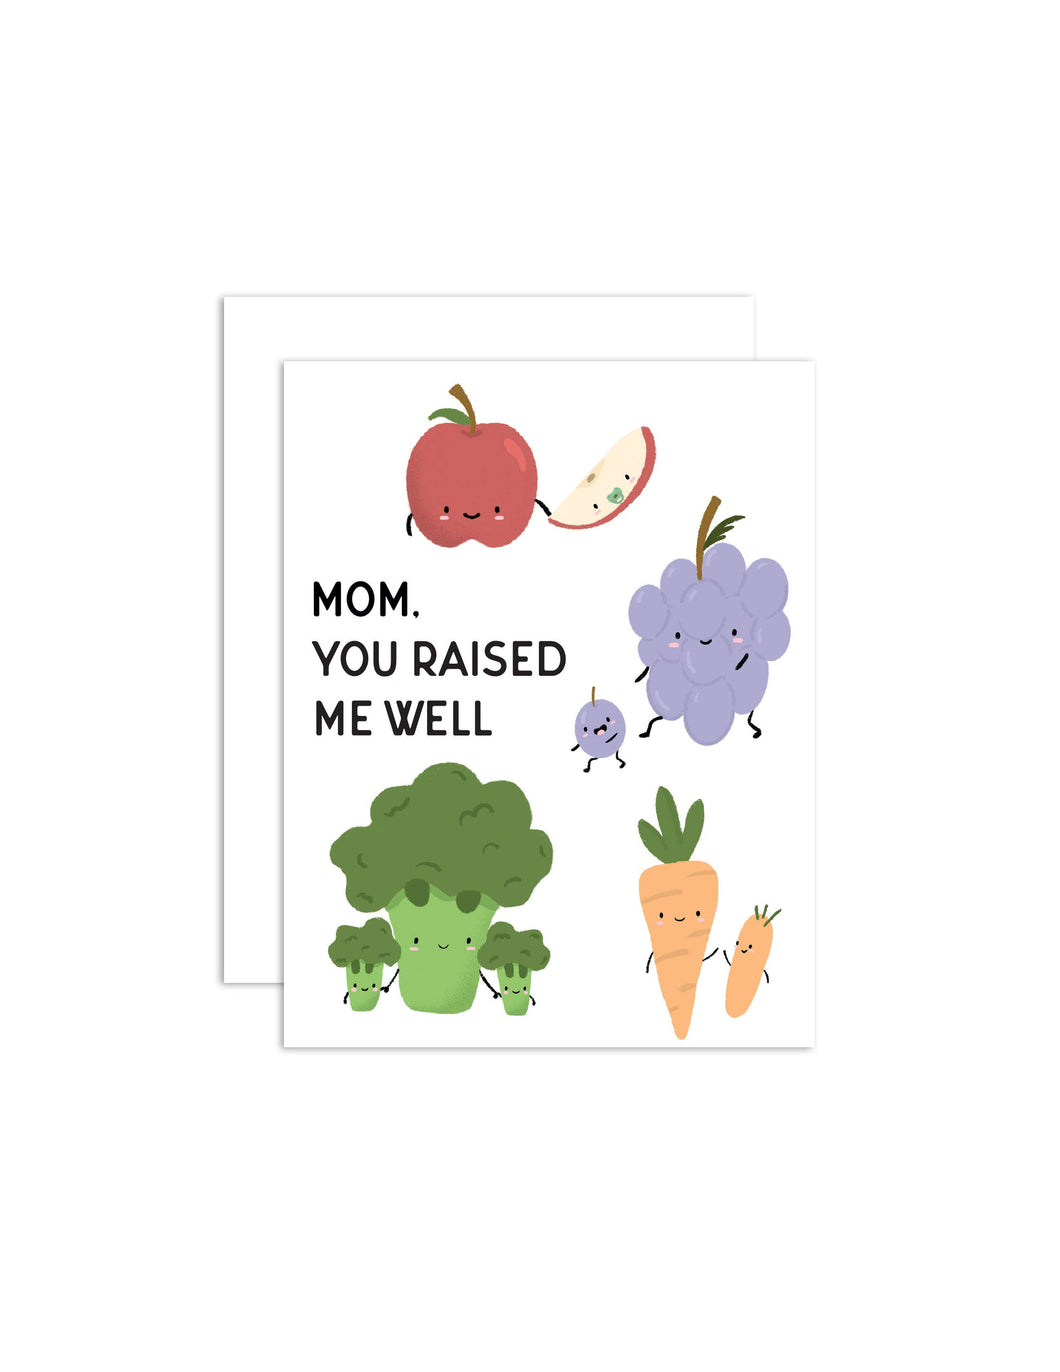 Mom, You Raised Me Well - Mother's Day Greeting Card